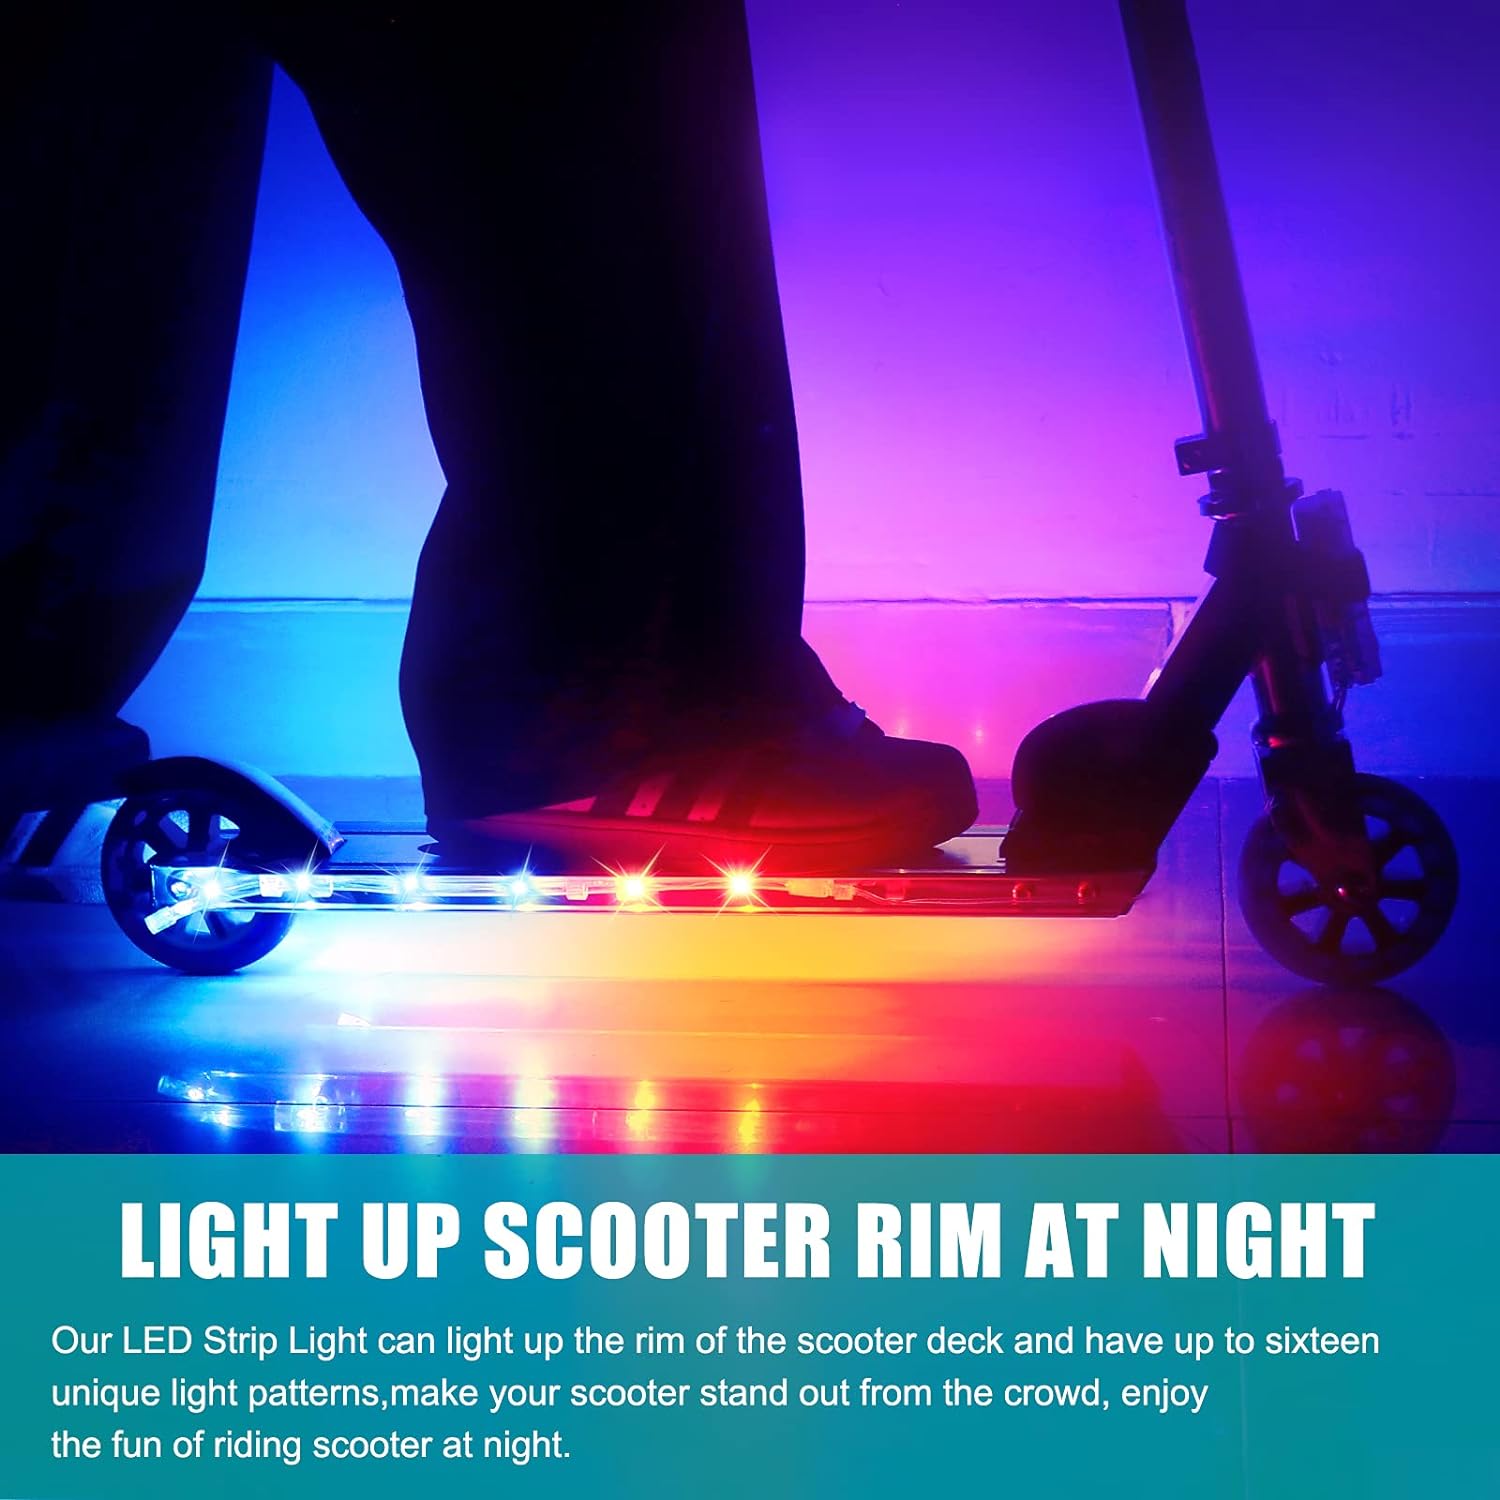 Waybelive LED Scooter Deck Light Review